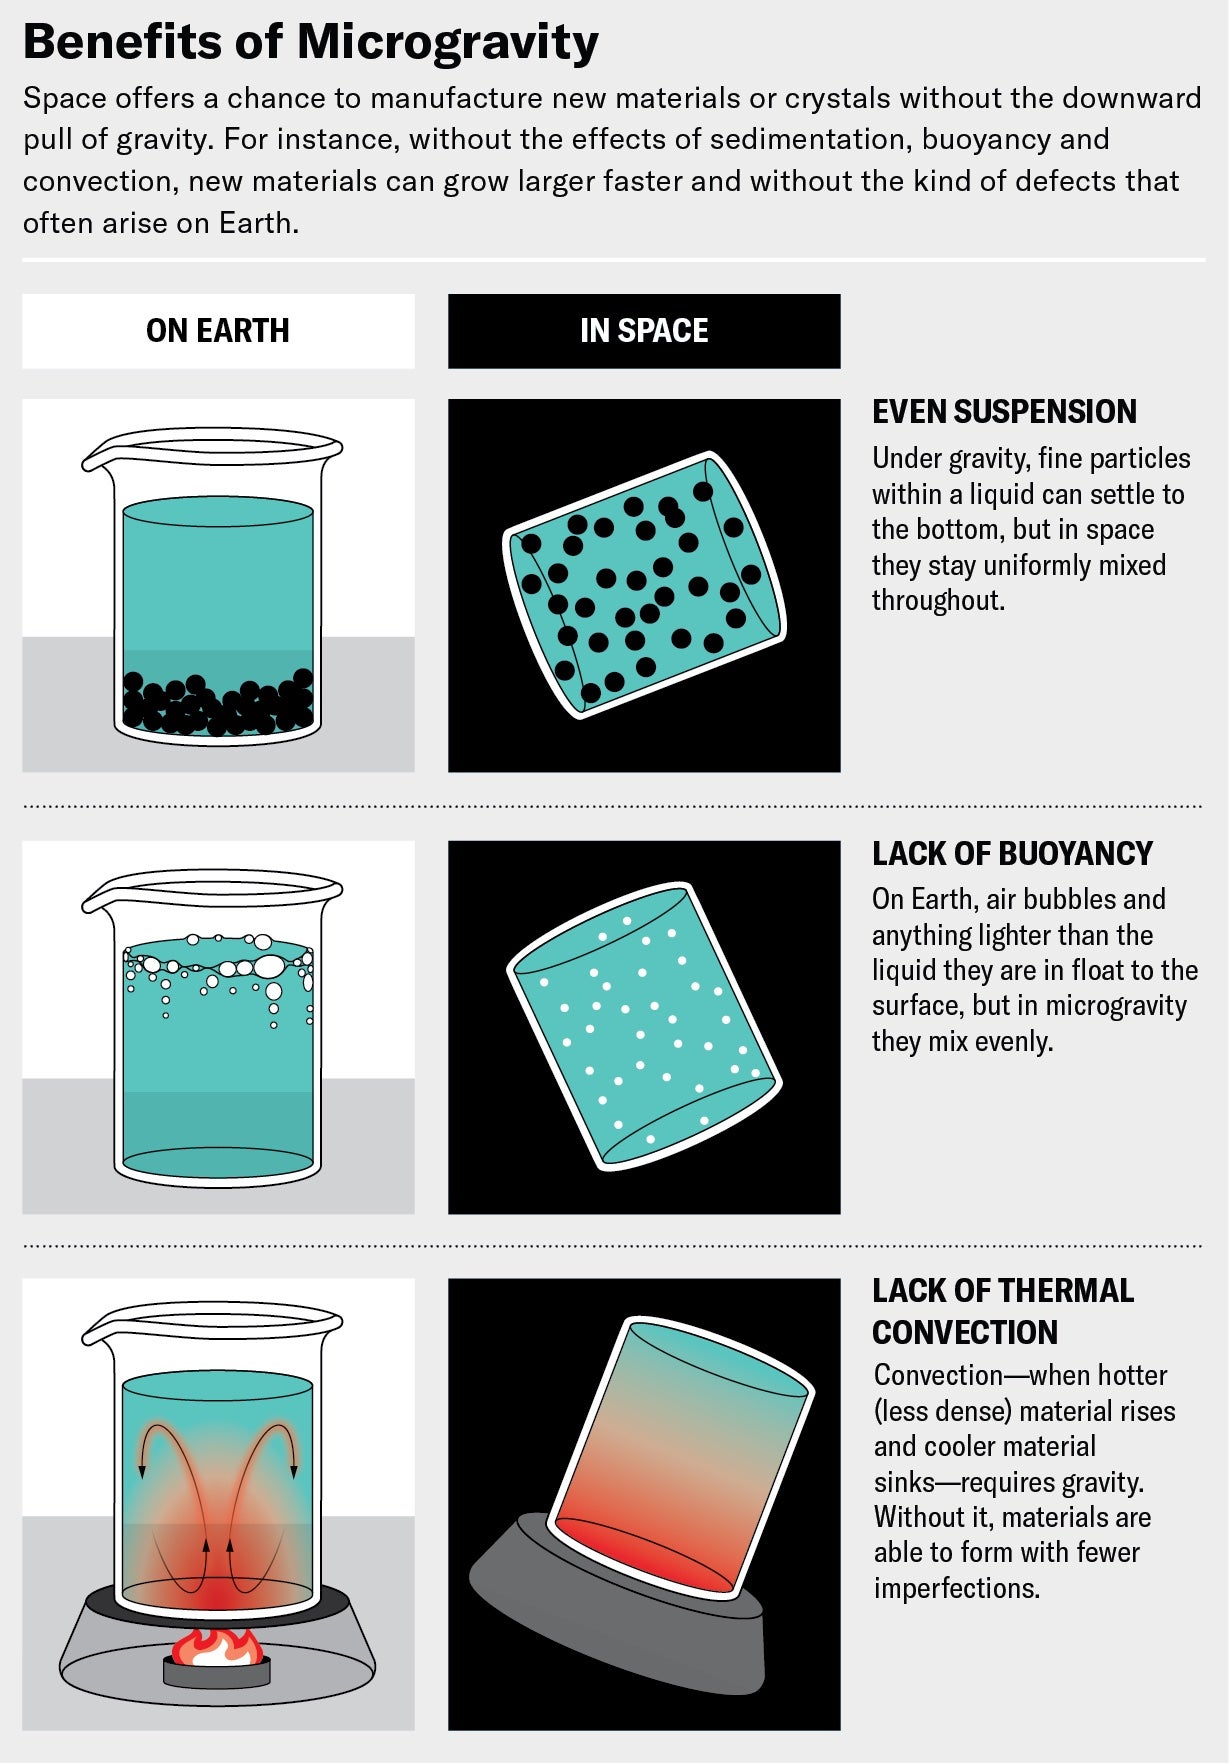 Graphic compares how materials behave on Earth versus in space, showing how a gravity-free environment allows for uniform mixing of particles and bubbles in liquid and a lack of thermal convection.